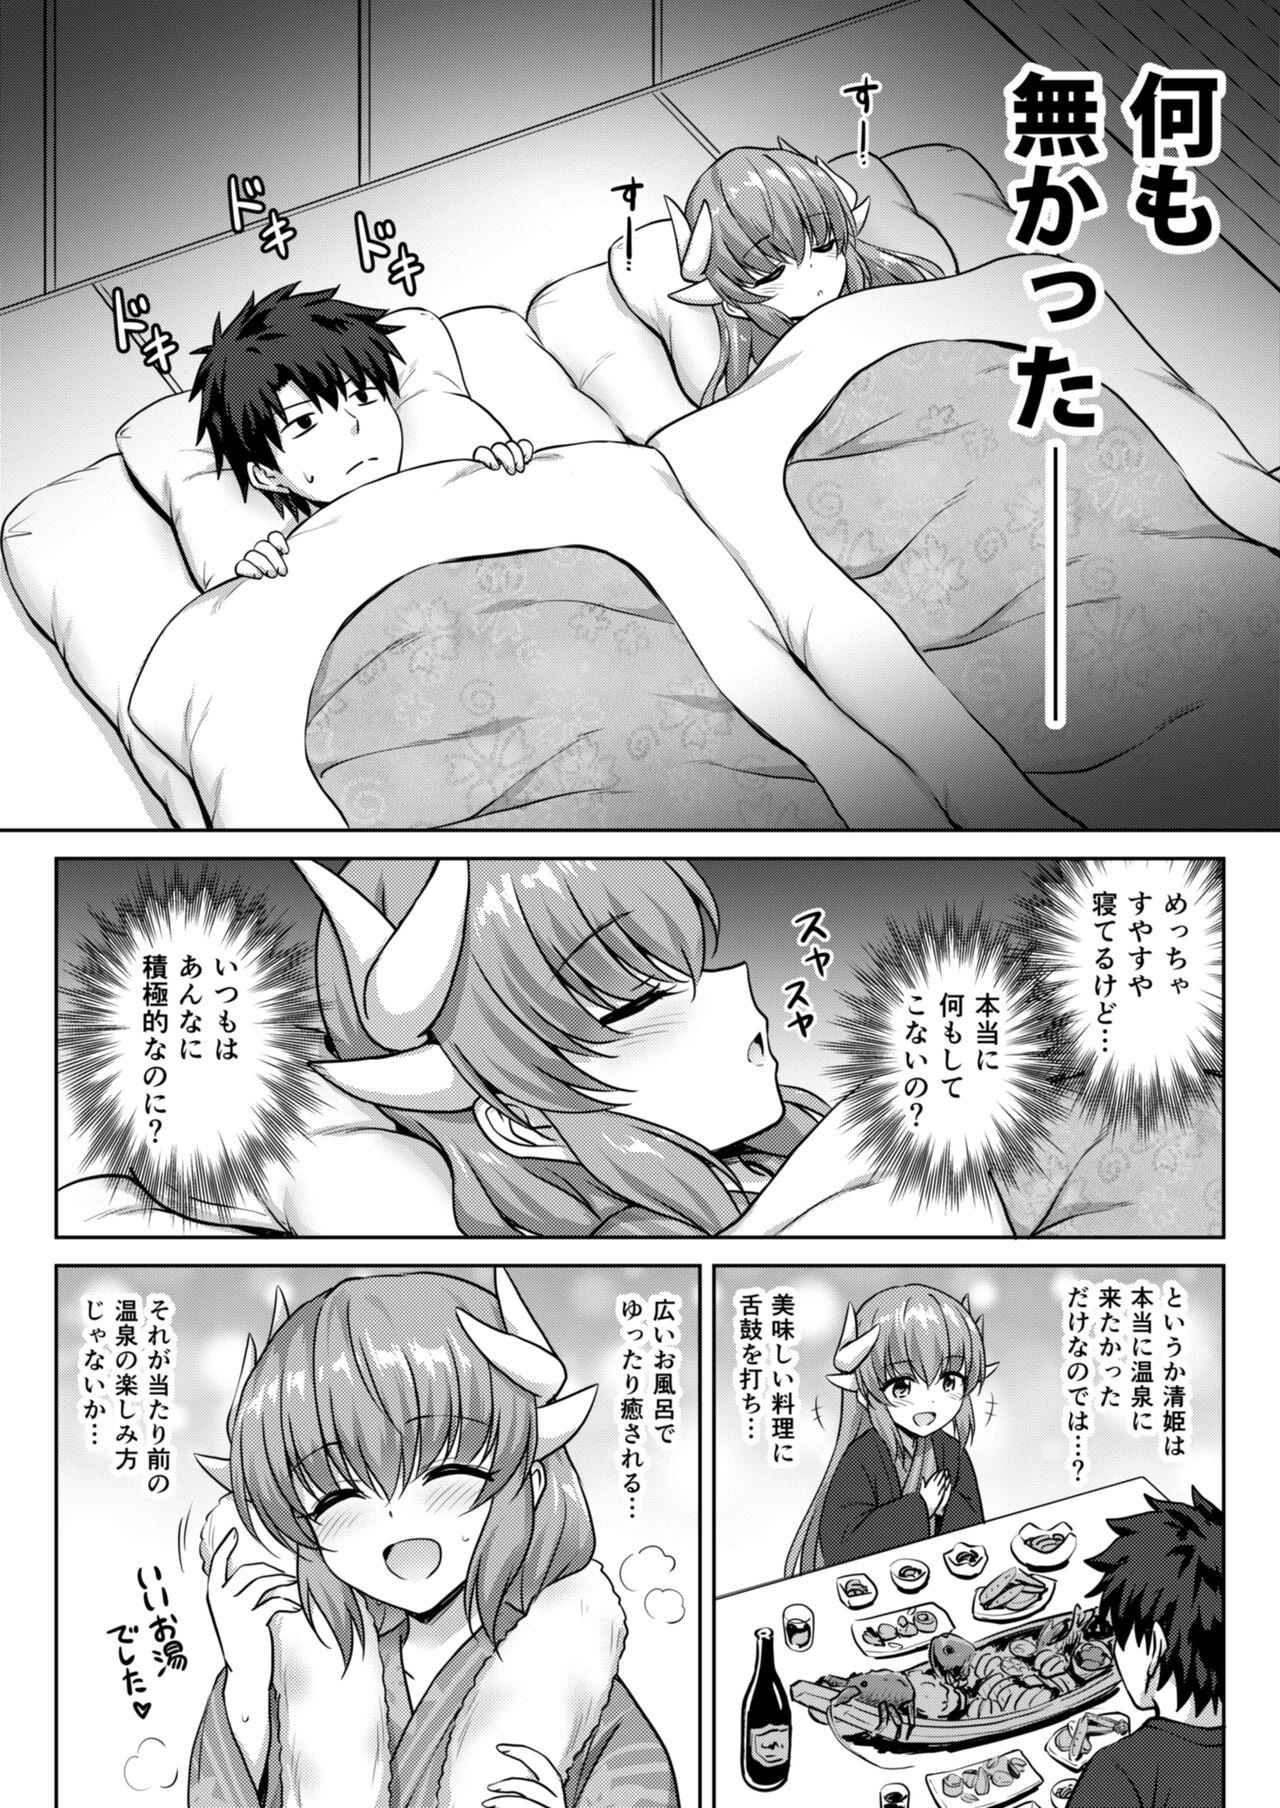 Women Kiyohime Onsen - Fate grand order Roludo - Page 3